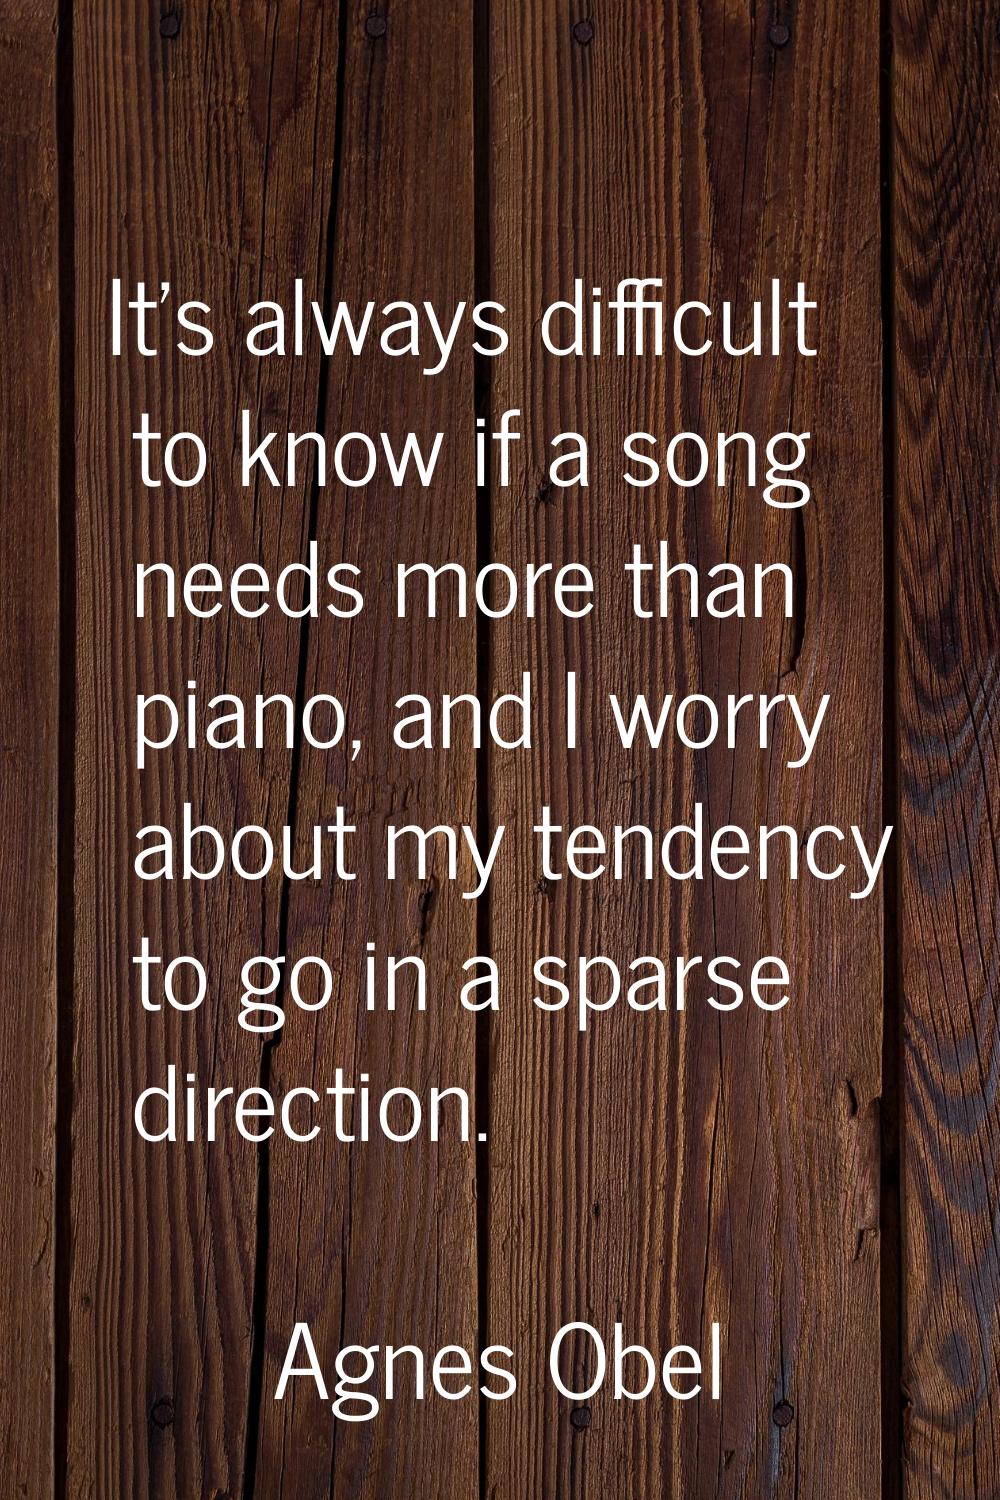 It's always difficult to know if a song needs more than piano, and I worry about my tendency to go 